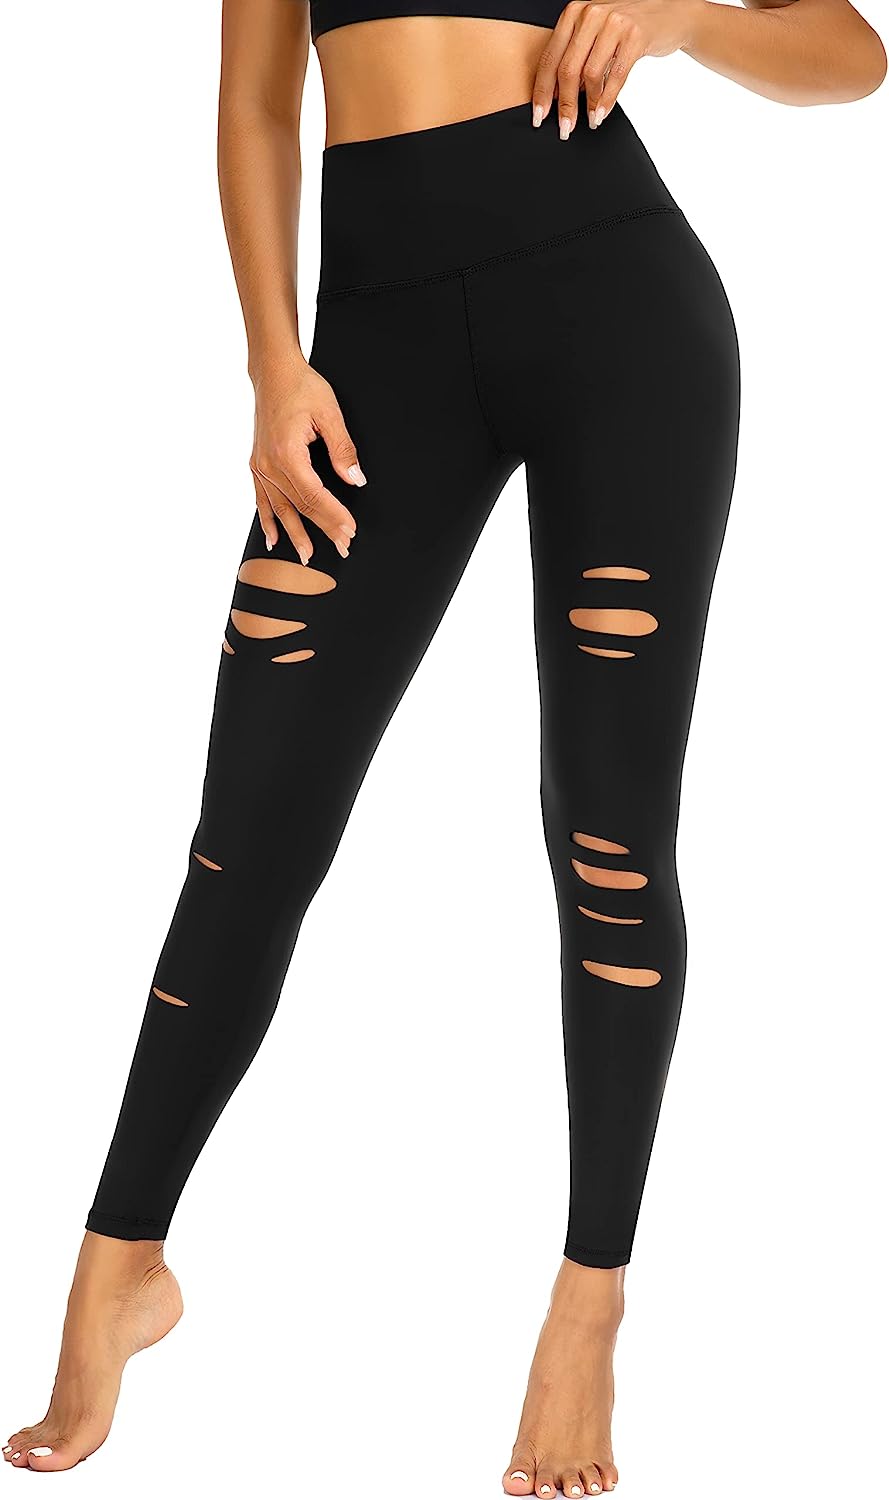  Leggings For Women Tummy Control-High Waisted Non See Through  Black Soft Workout Yoga Pants